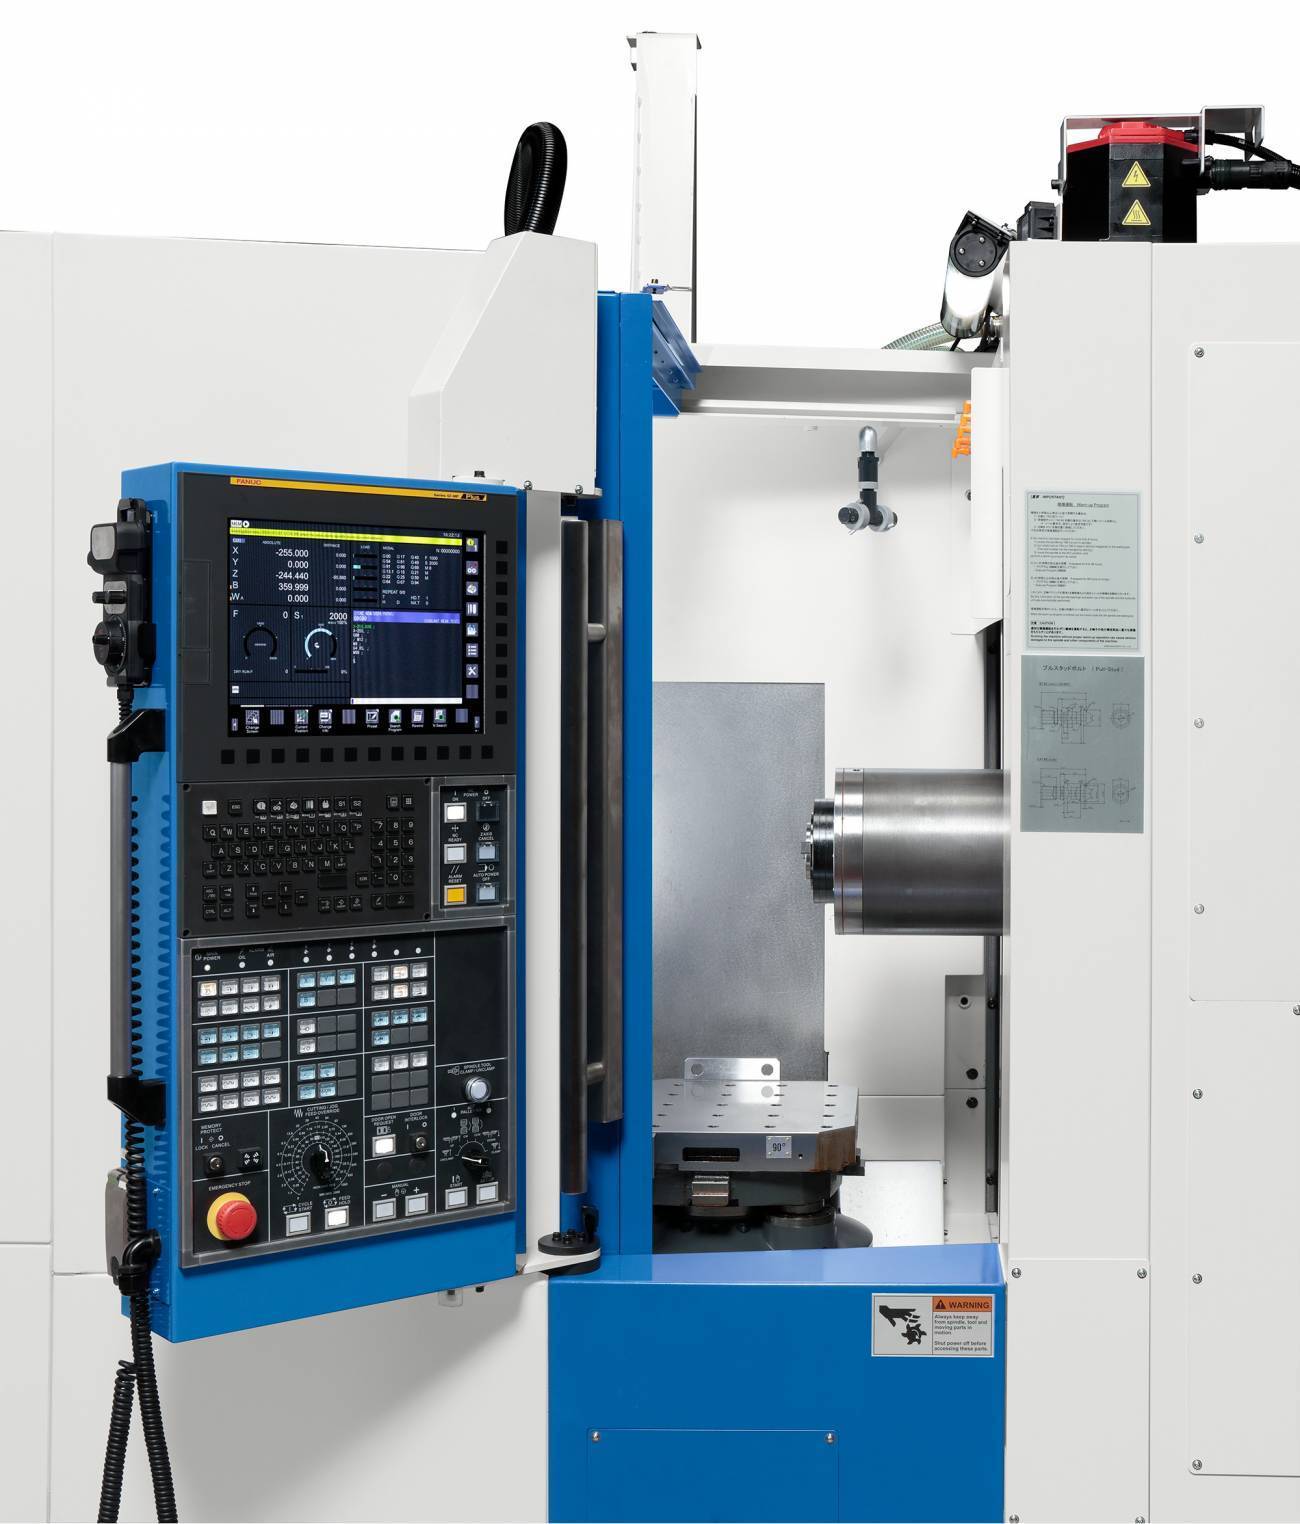 the KIWA KH-4100kai machining center sold by Methods Machine Tools with the front door opened